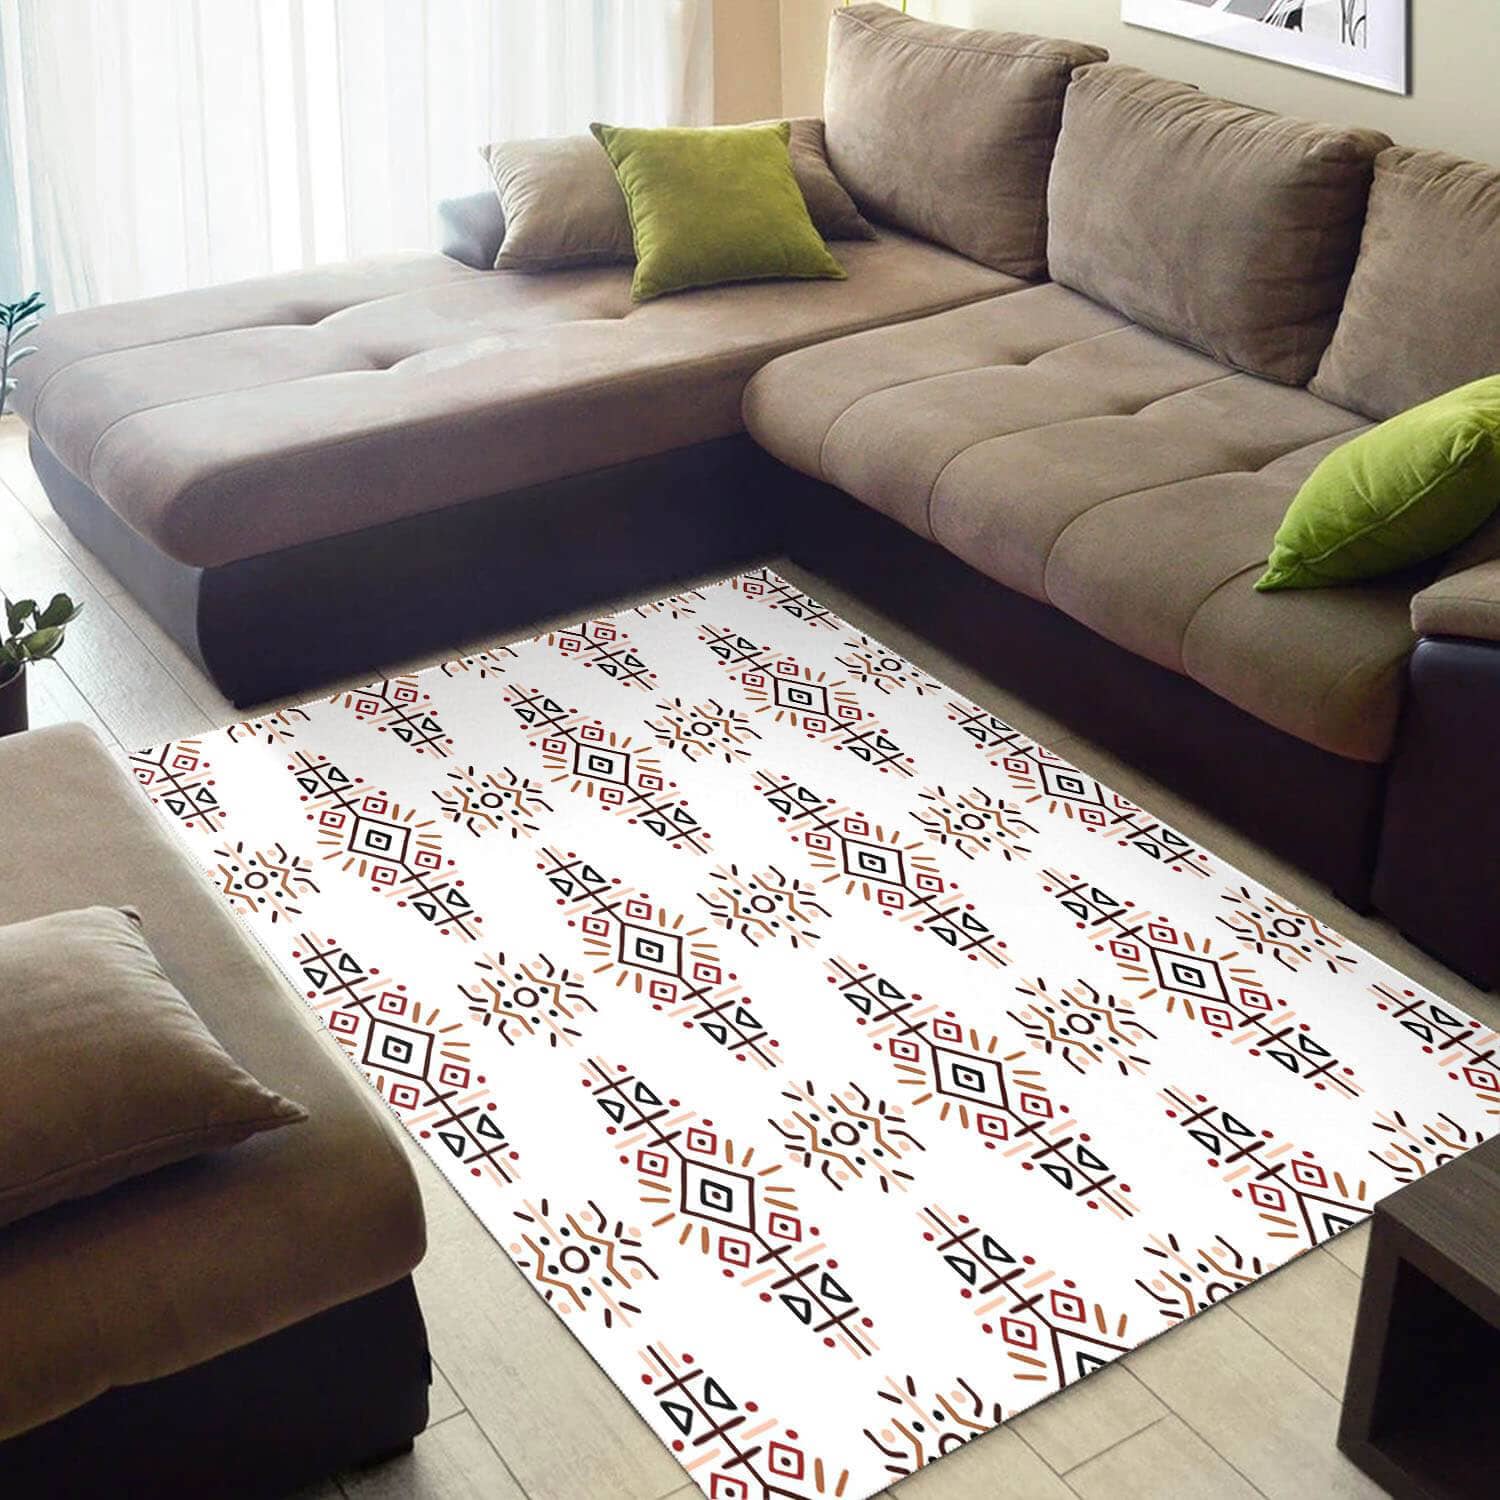 Beautiful African American Colorful Themed Ethnic Seamless Pattern Design Floor Living Room Rug